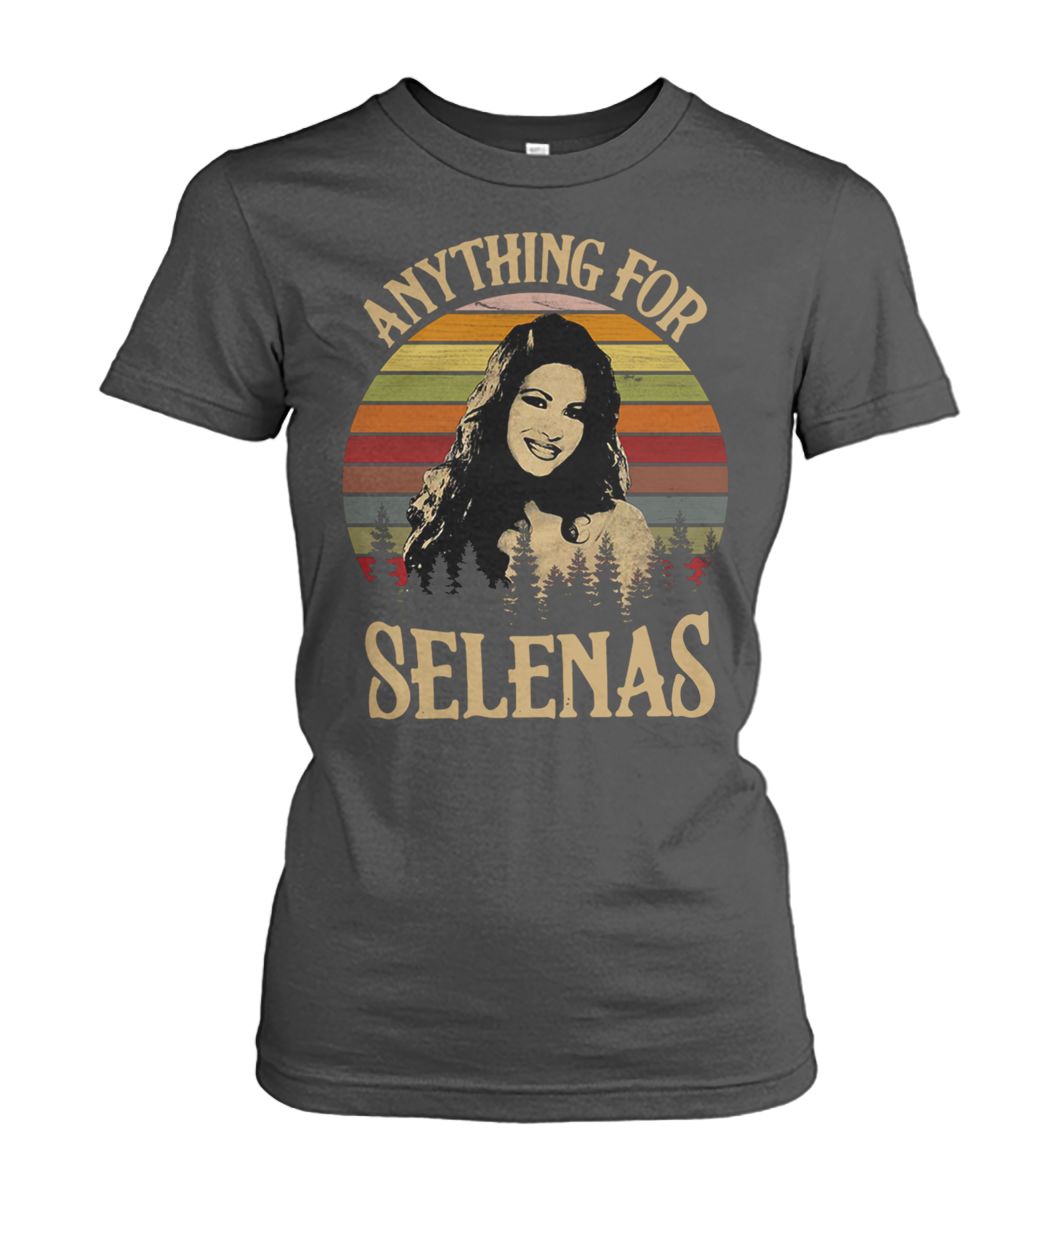 Anything for selenas vintage women's crew tee